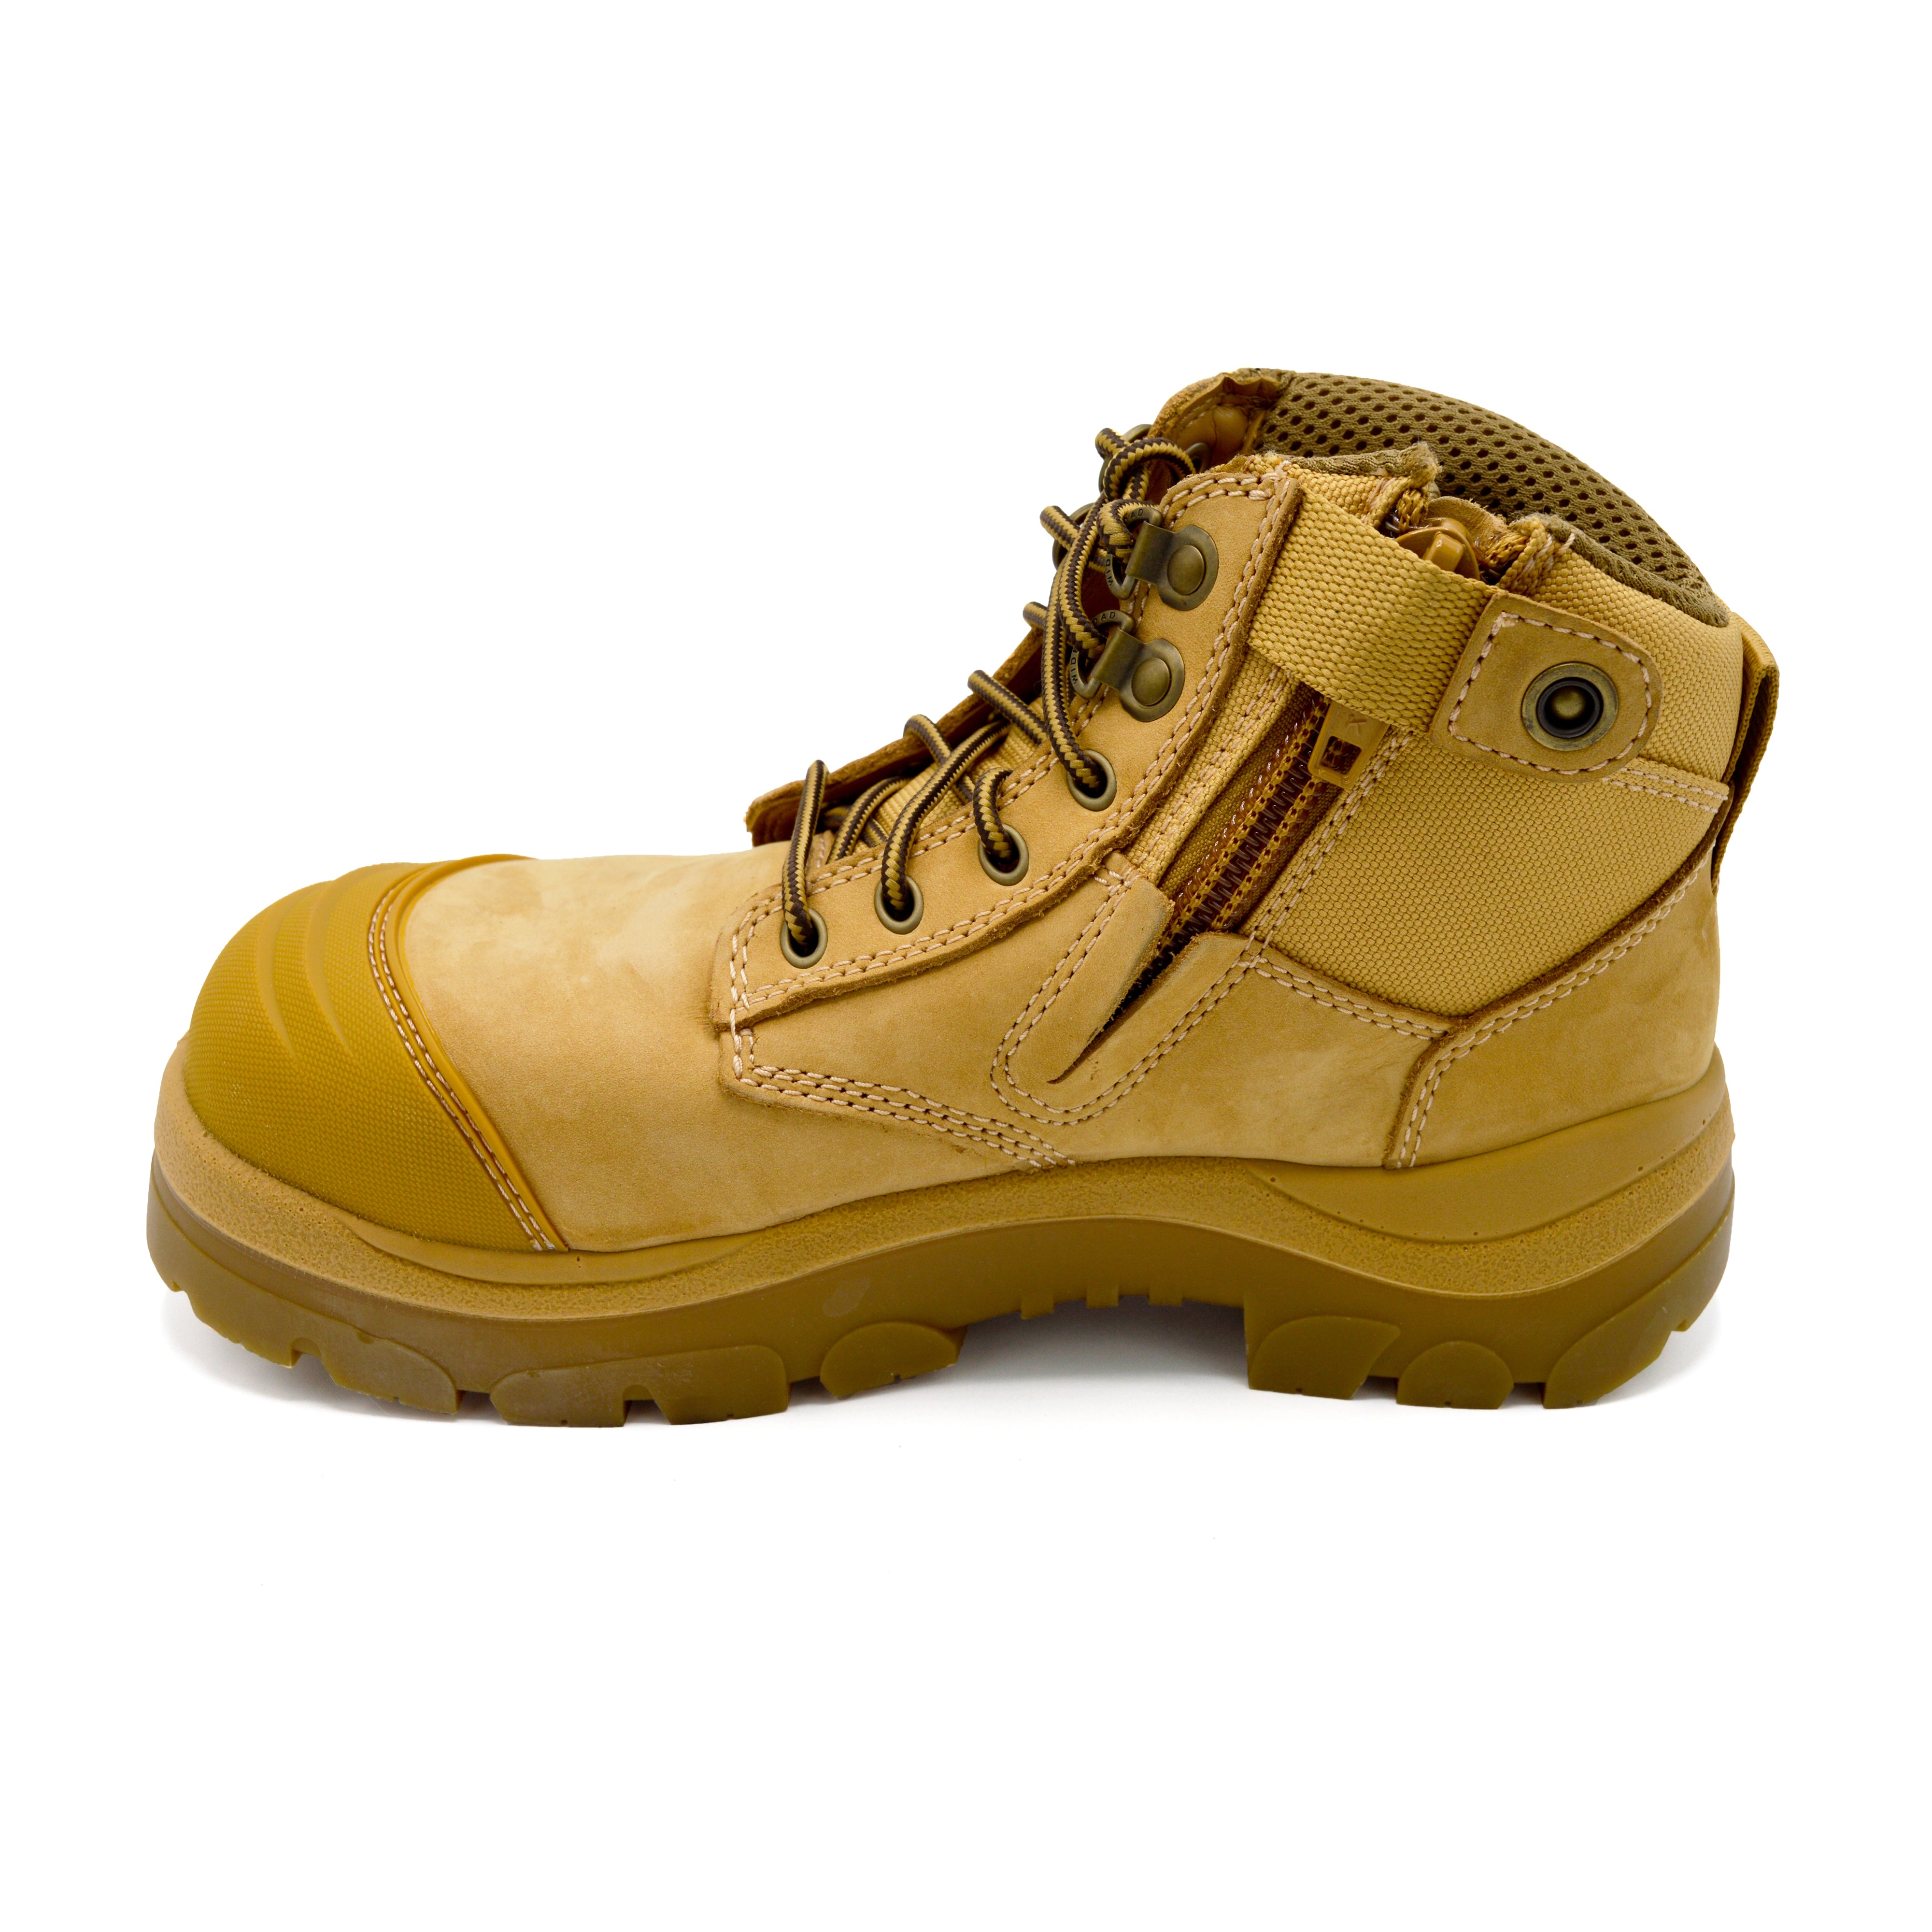 Mens Zipped Beige Safety Boots for Bunions